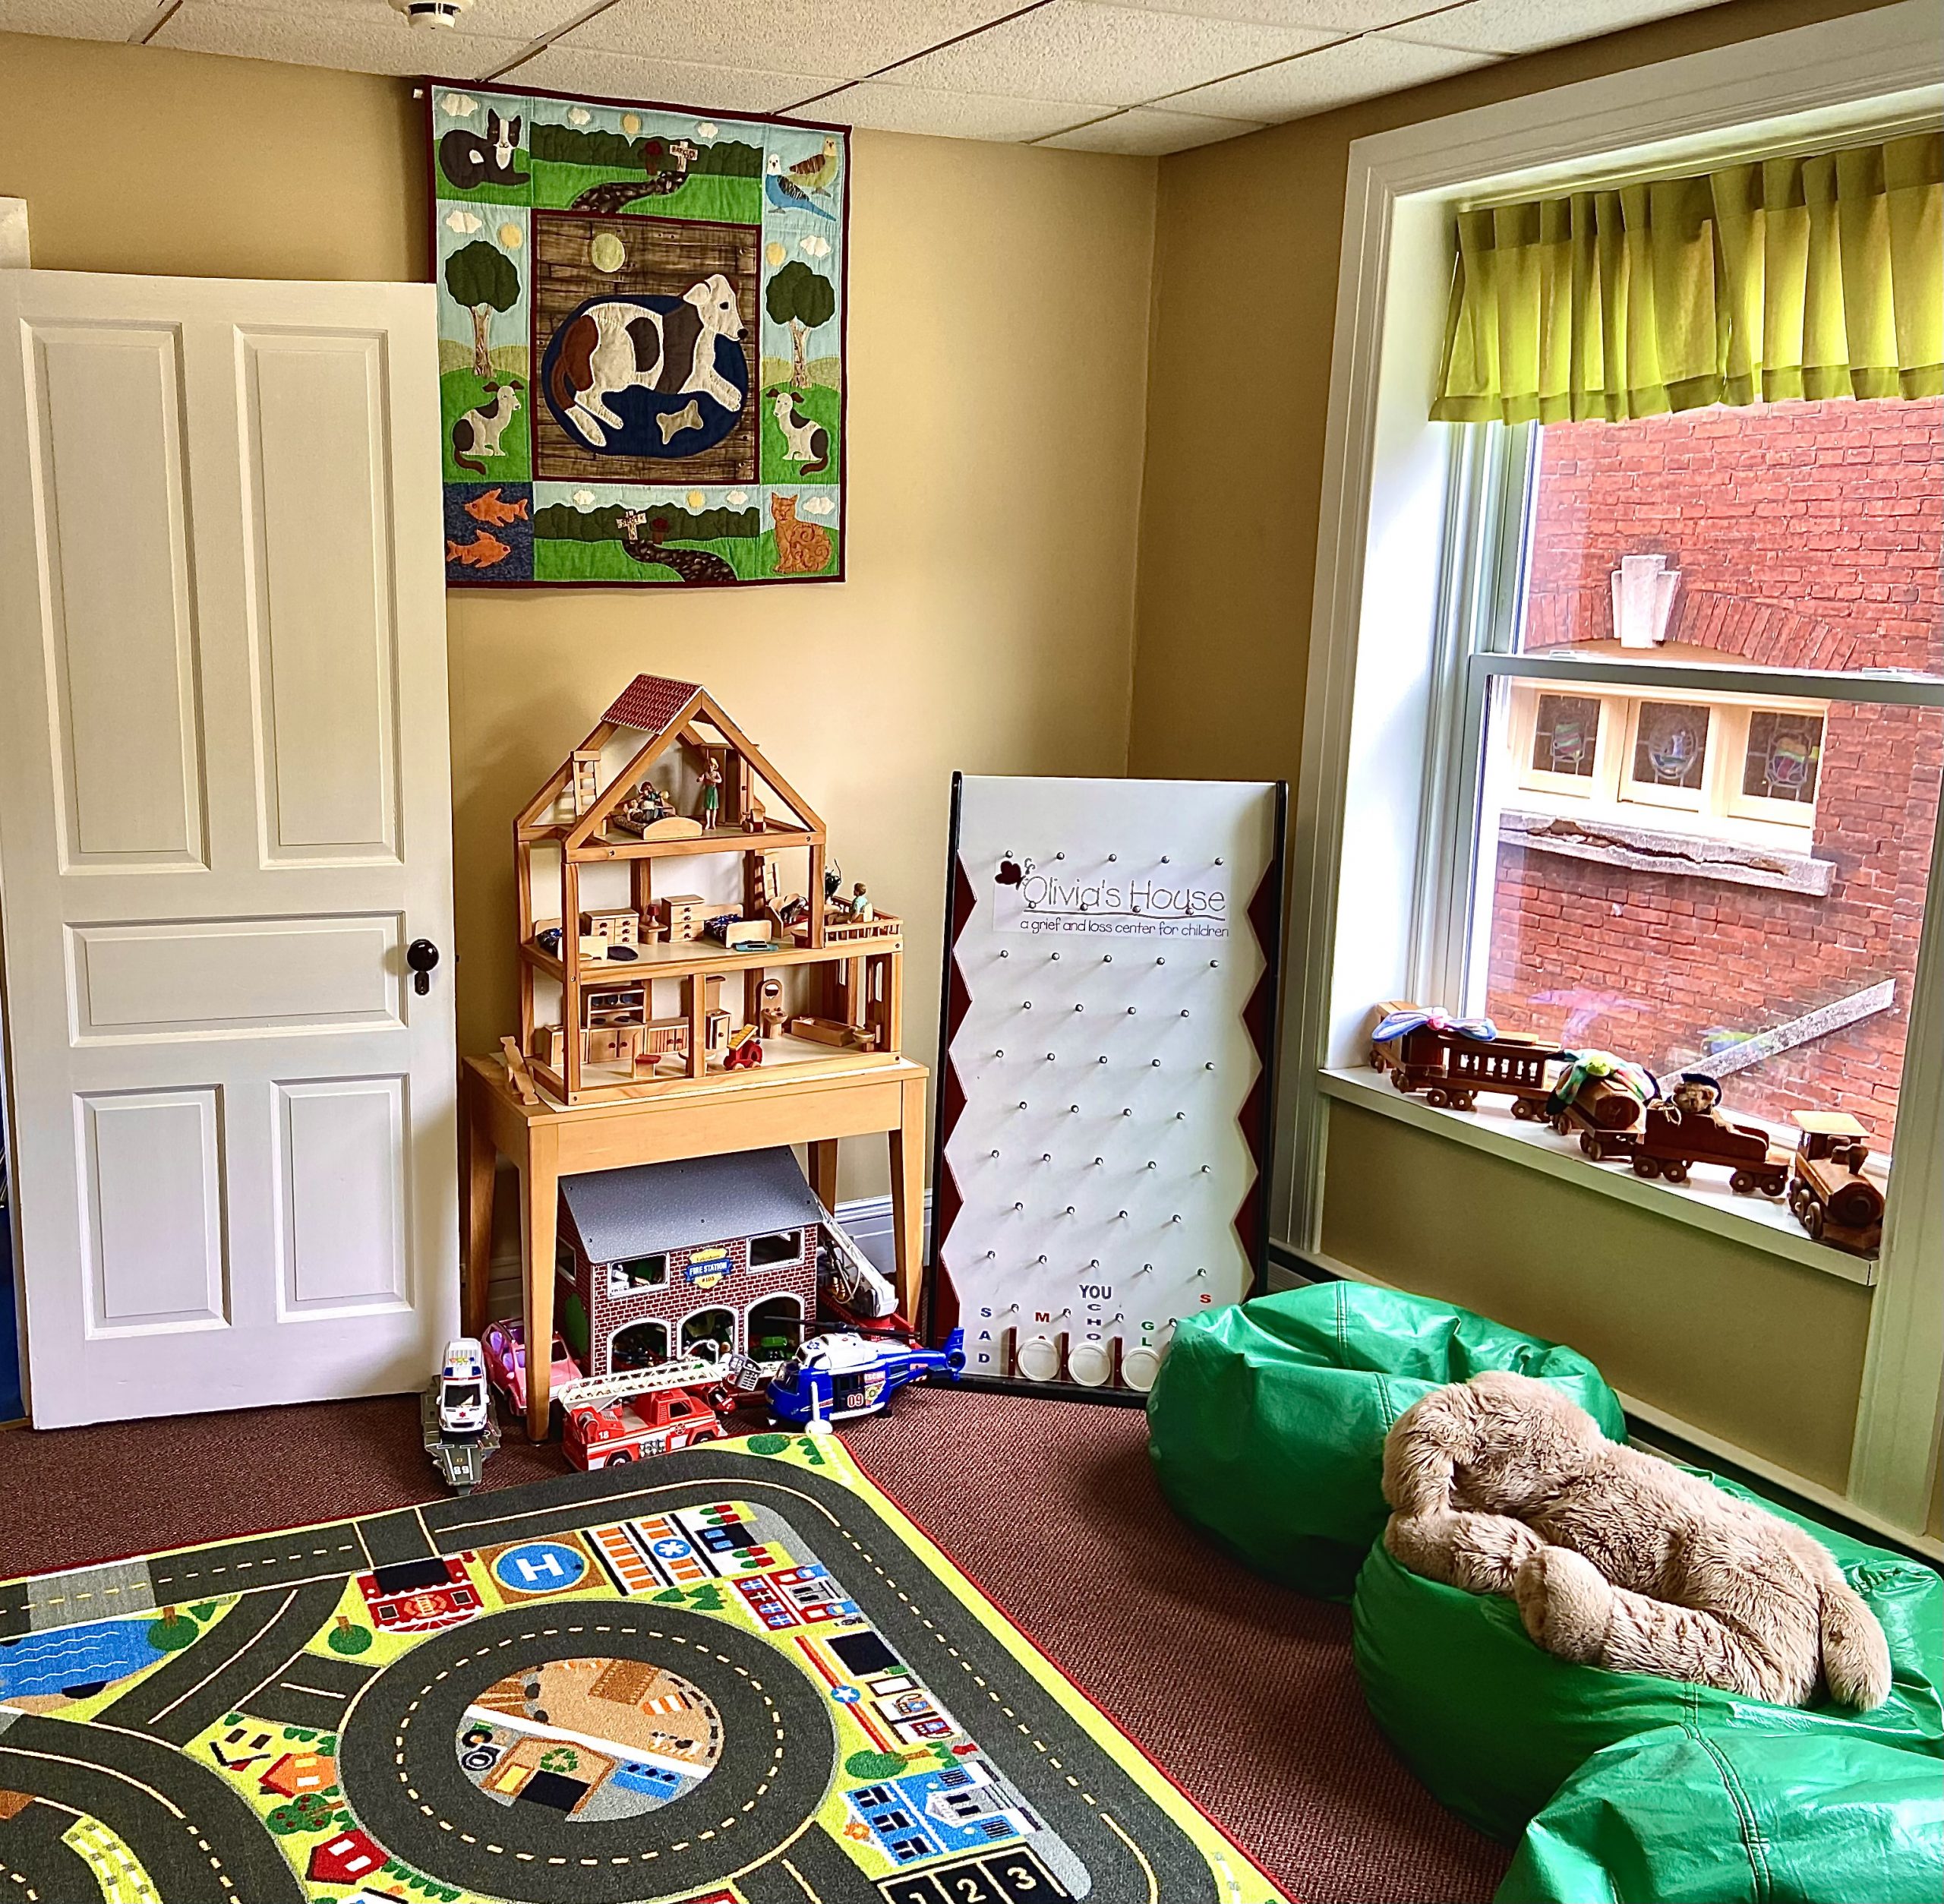 Equipped with grief-related toys and games, the play room serves our youngest grievers, whether they are preschool or elementary school age, and facilitates grief-work through play.